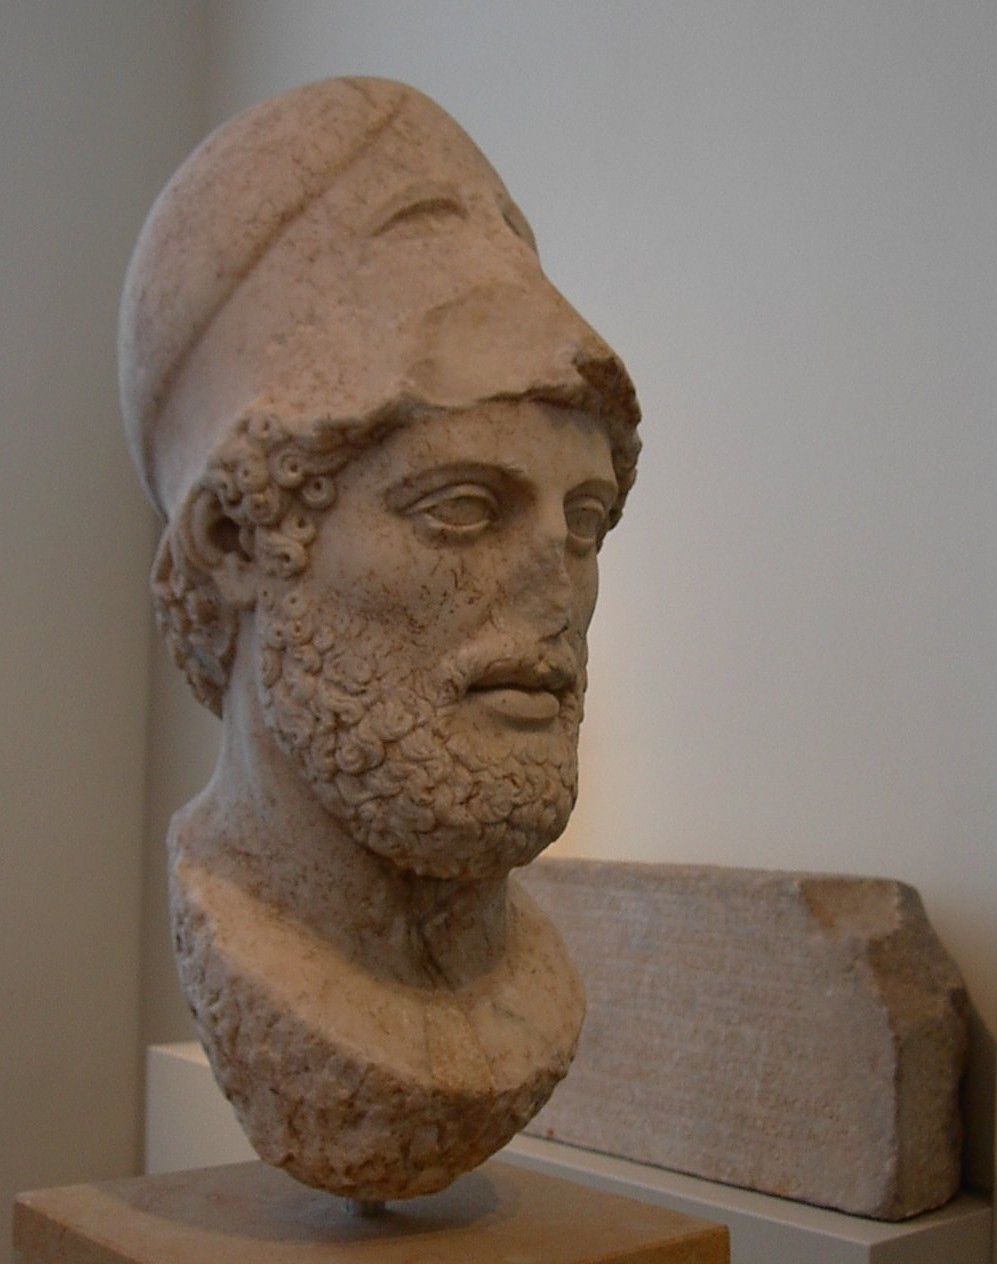 Pericles, Staatliche Museen zu Berlin - foto: Adam Carr, Wikimedia Commons <http://commons.wikimedia.org/wiki/File:Pericles_bust.jpg>